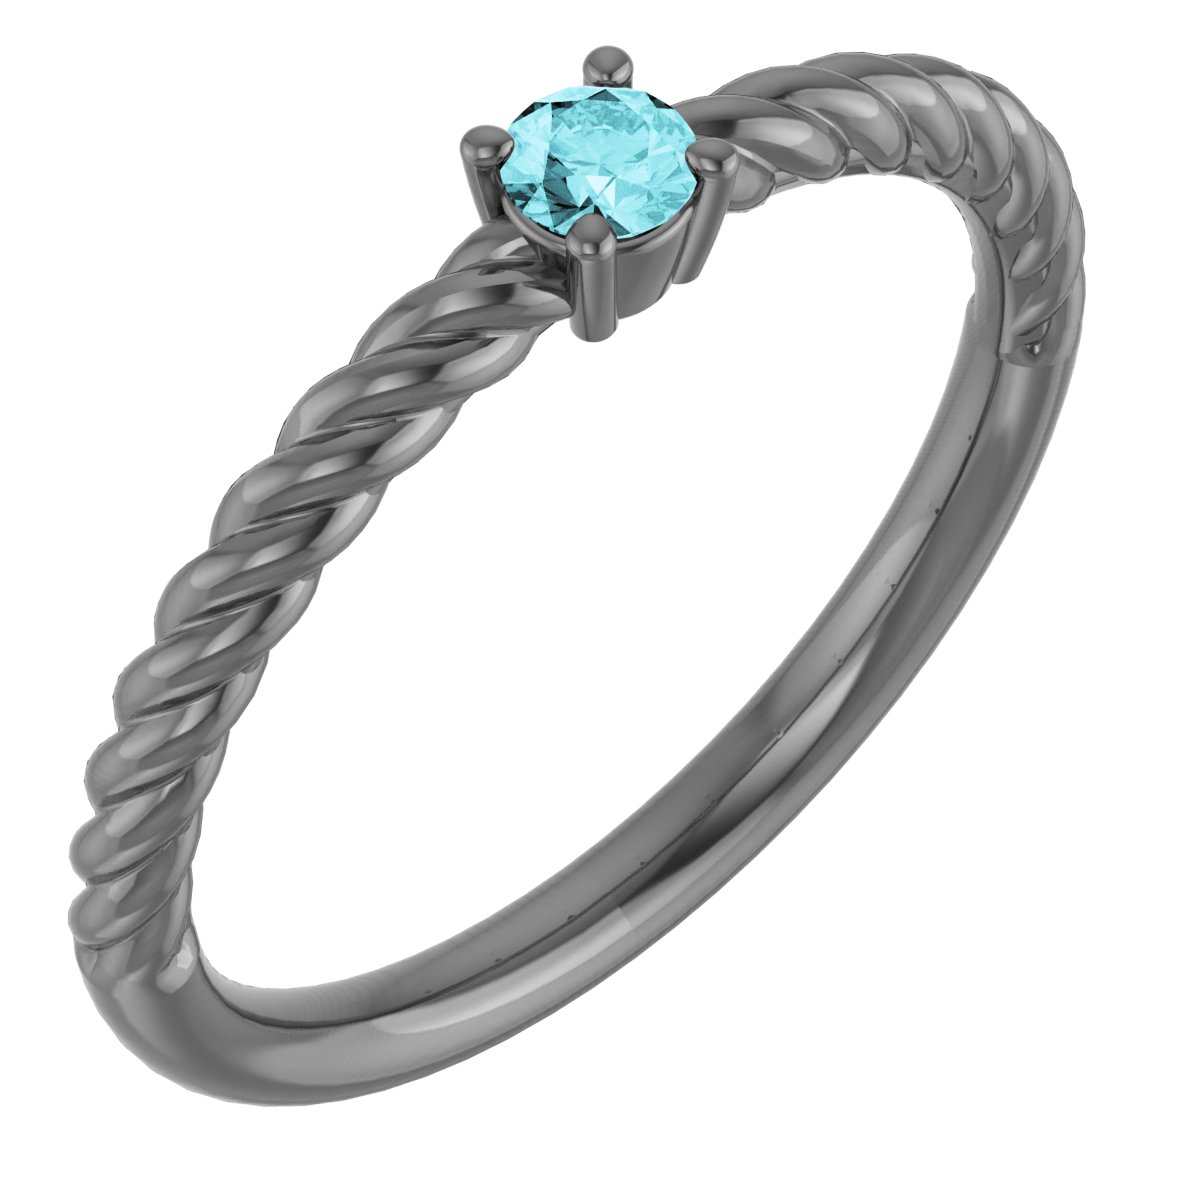 Sterling Silver 3 mm Natural Blue Zircon Solitaire Rope Ring